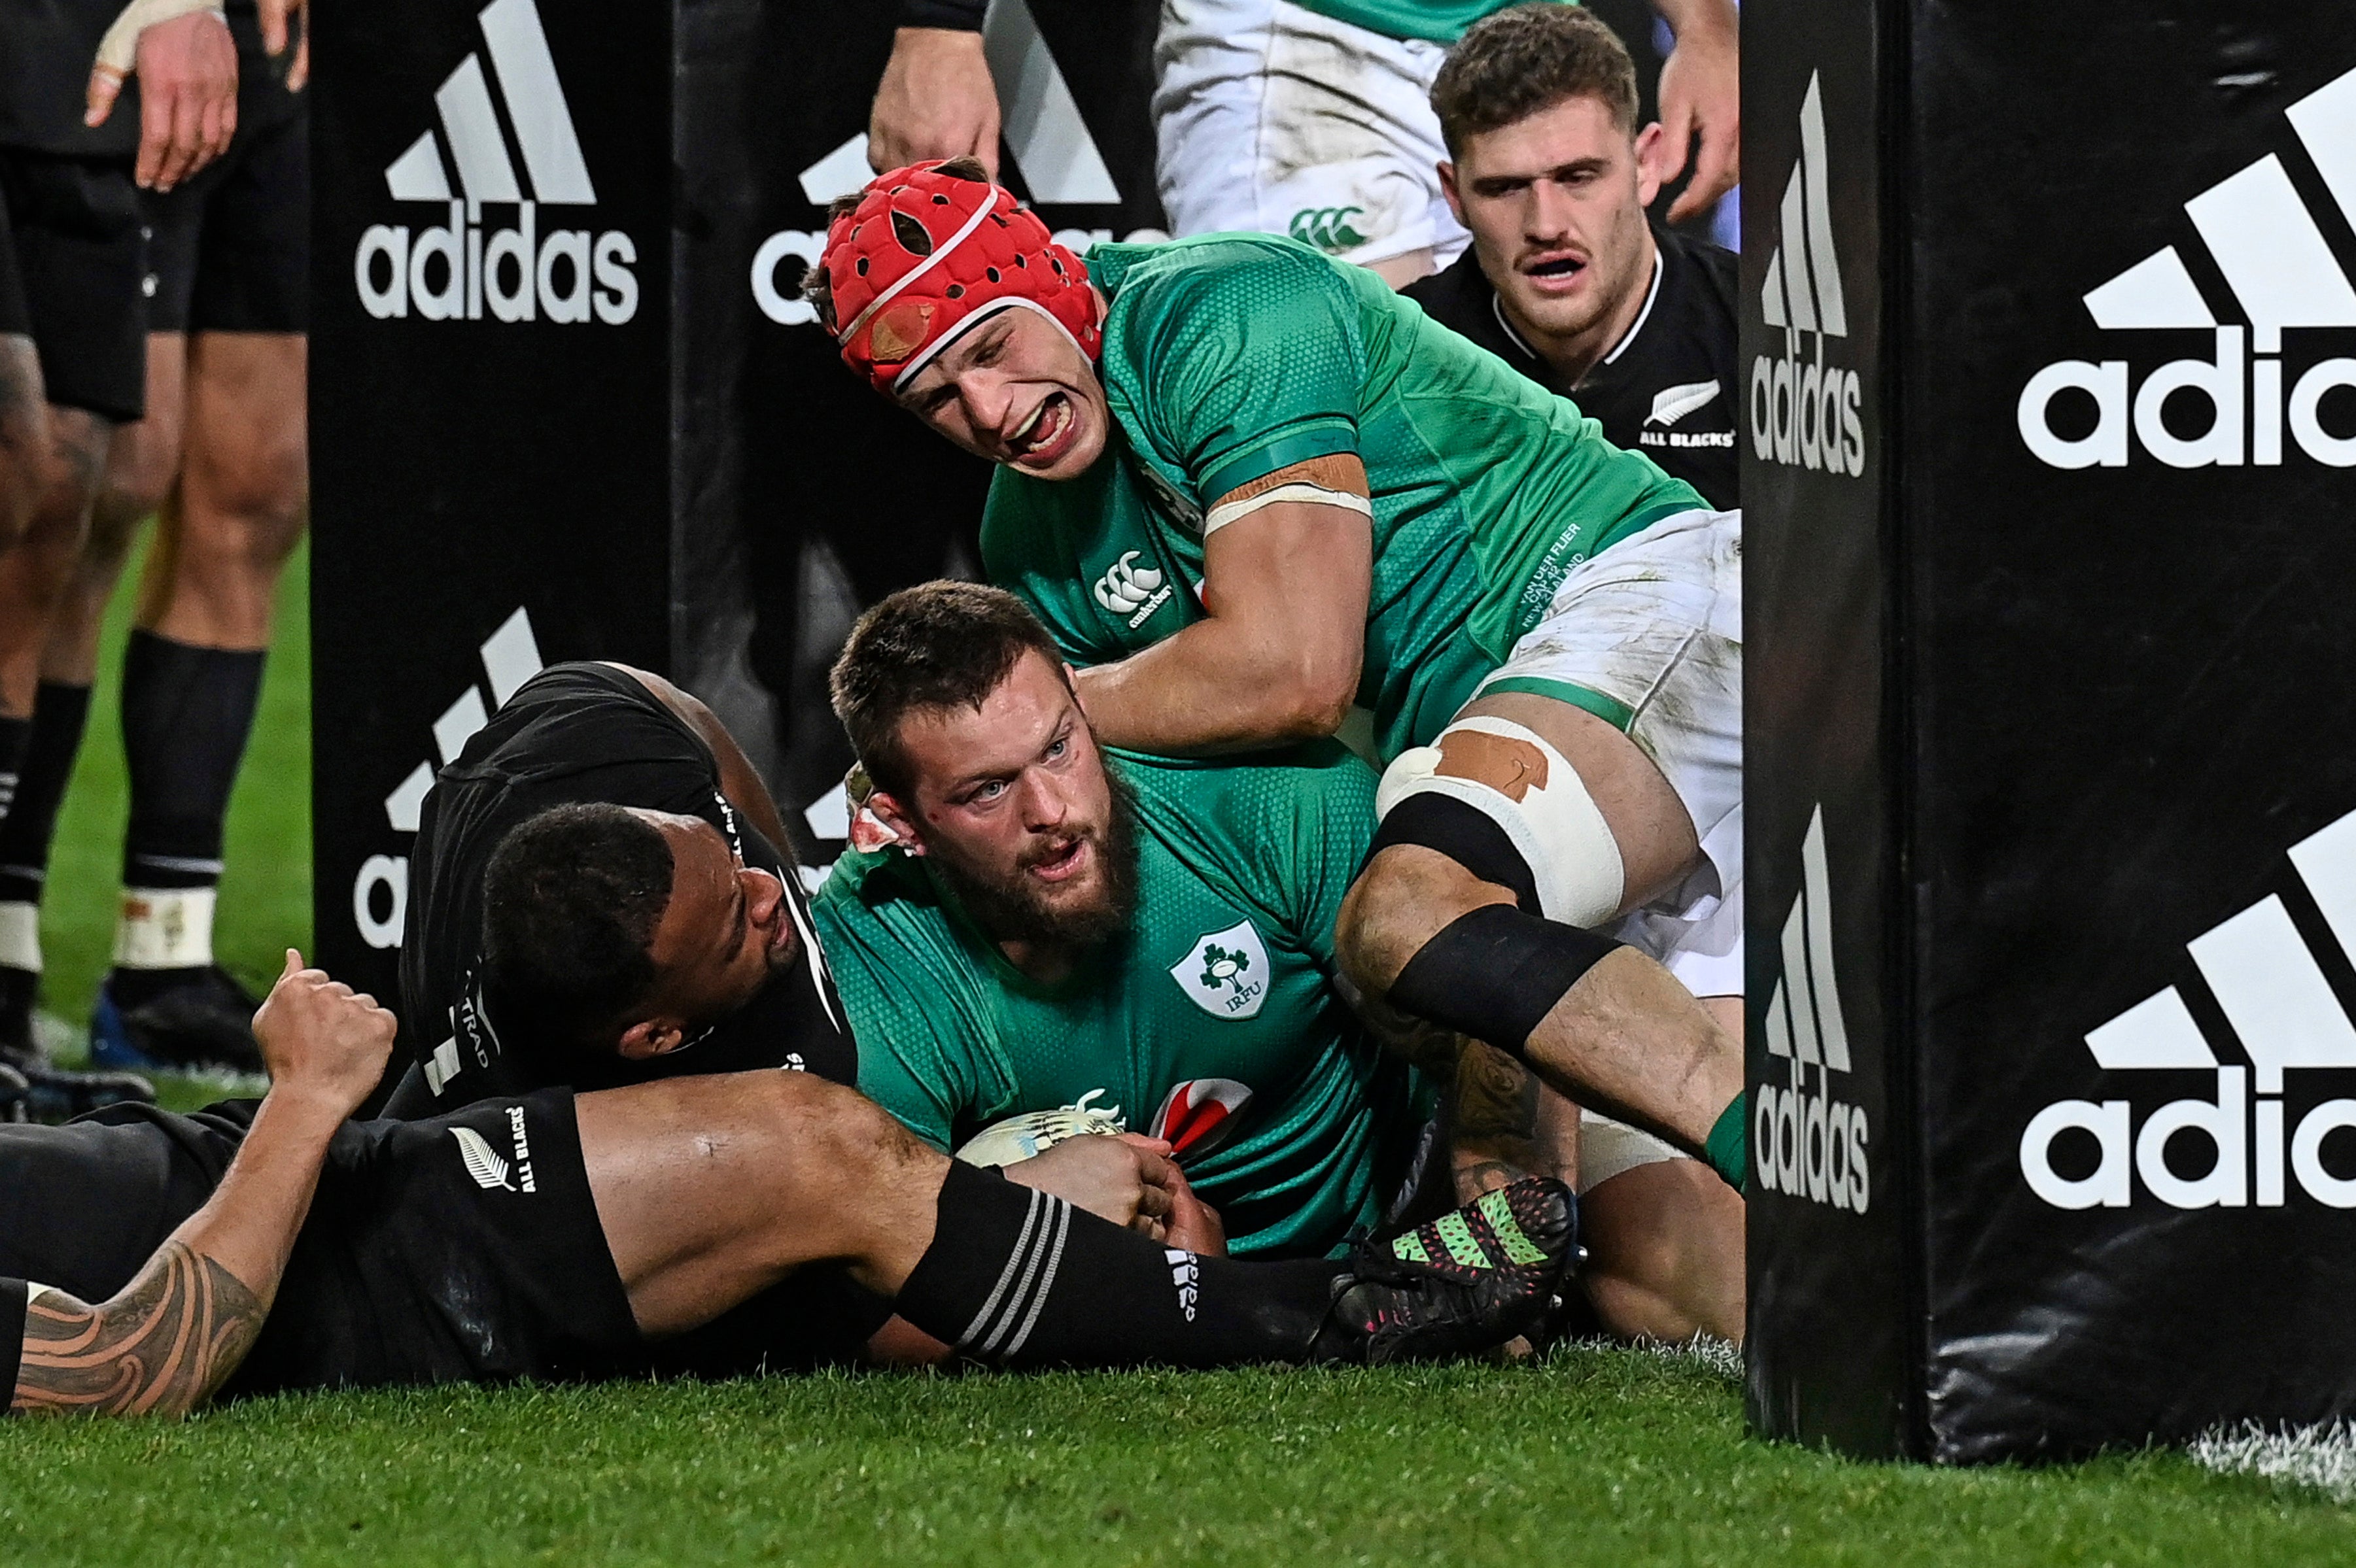 Andrew Porter scored a try in each half as Ireland beat the All Blacks in Dunedin for the first time in New Zealand to level their three-match Test series (Andrew Cornaga/AP)